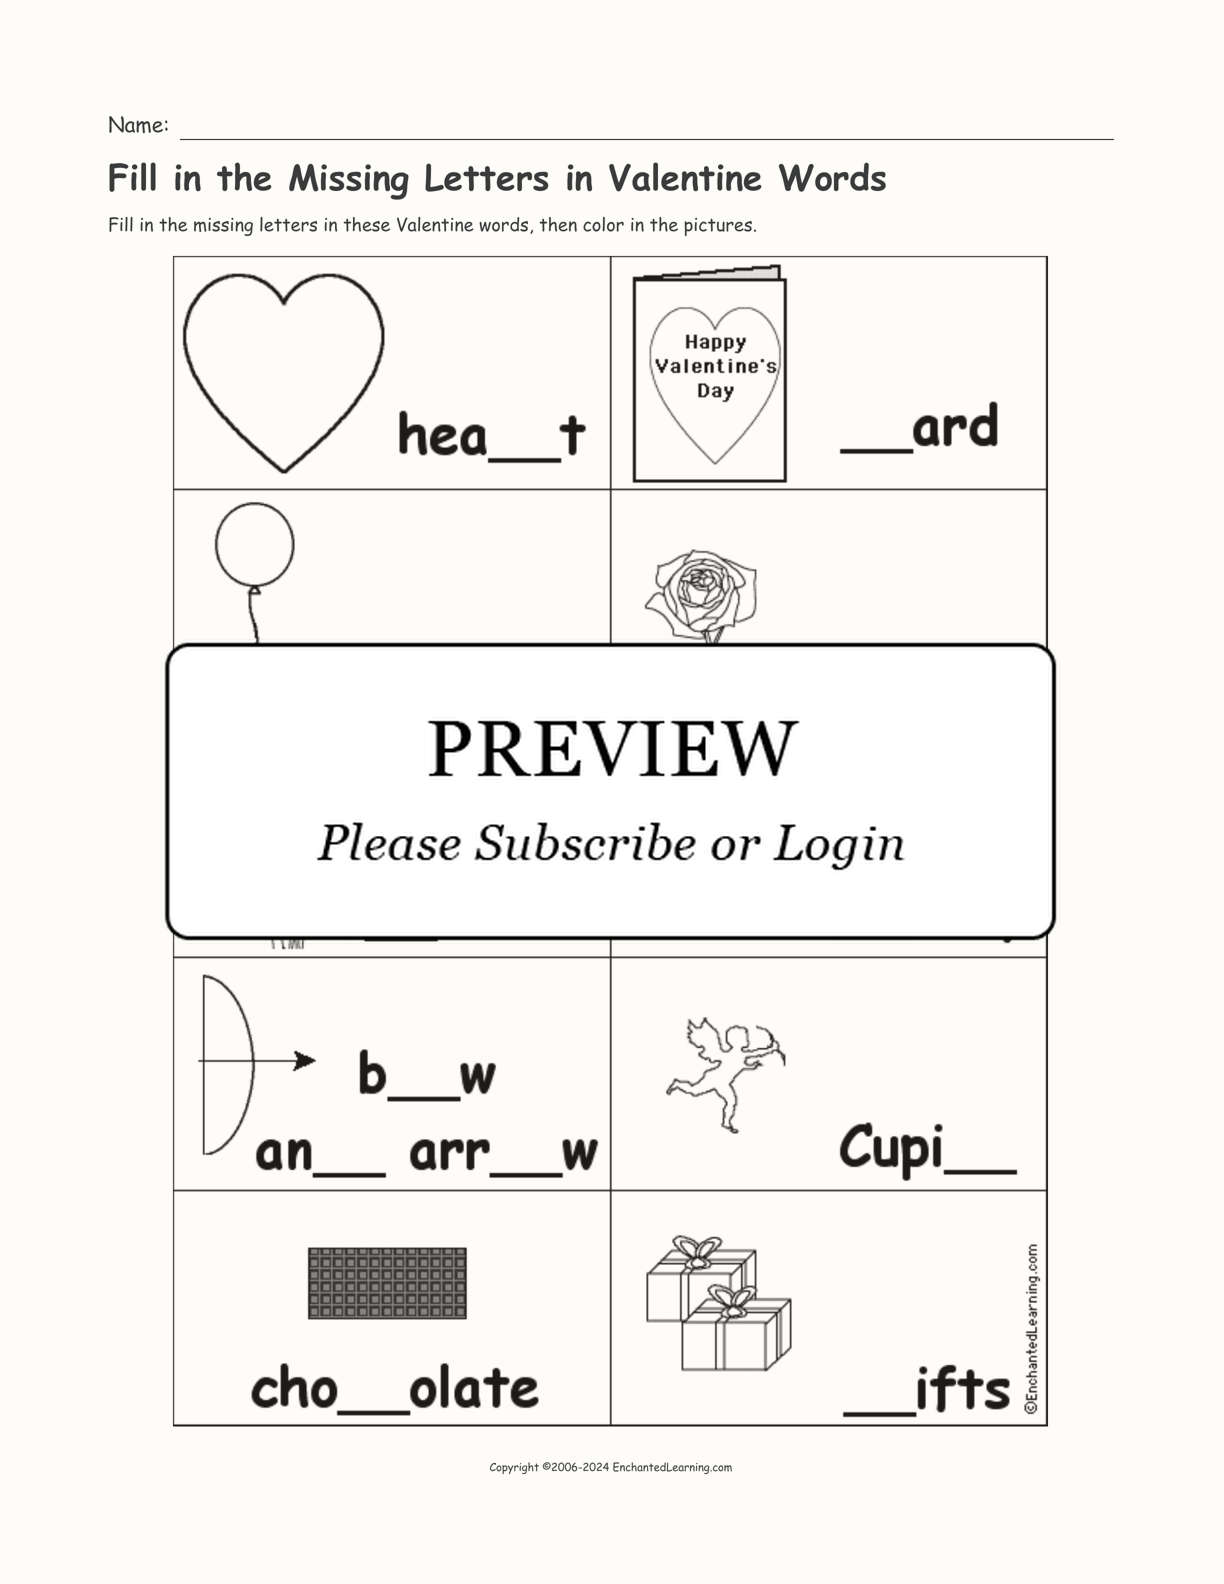 Fill in the Missing Letters in Valentine Words interactive worksheet page 1